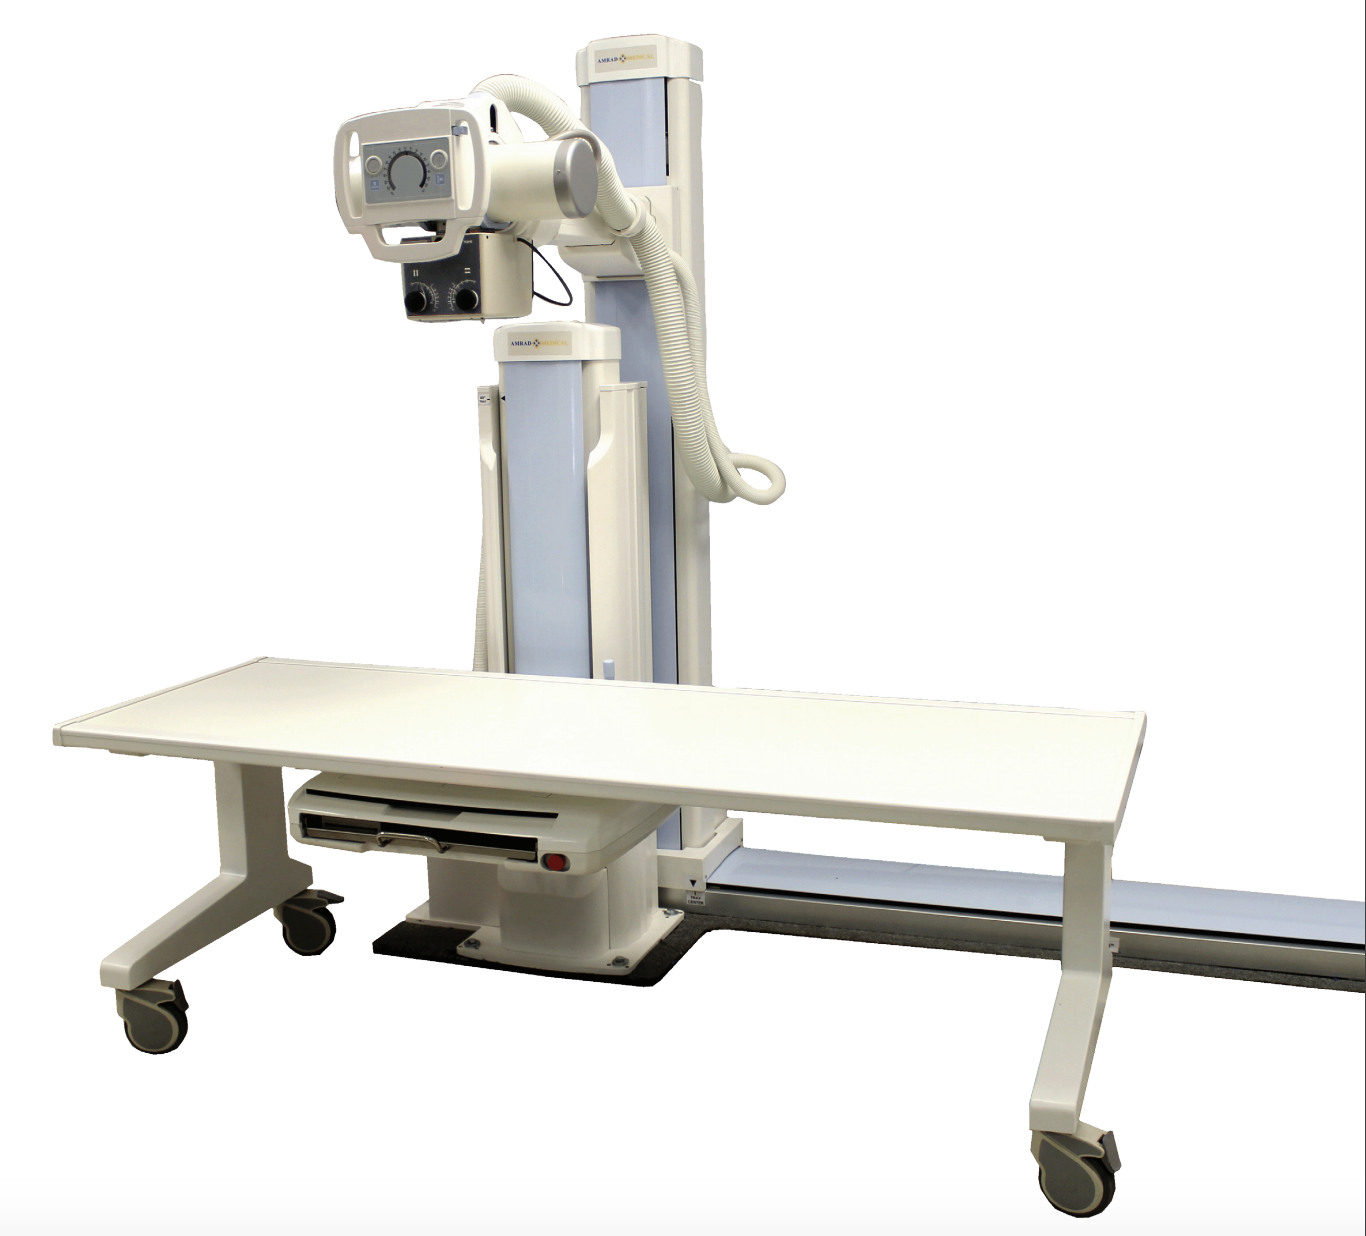 frs- Amrad Medical X-Ray Equipment Chicago